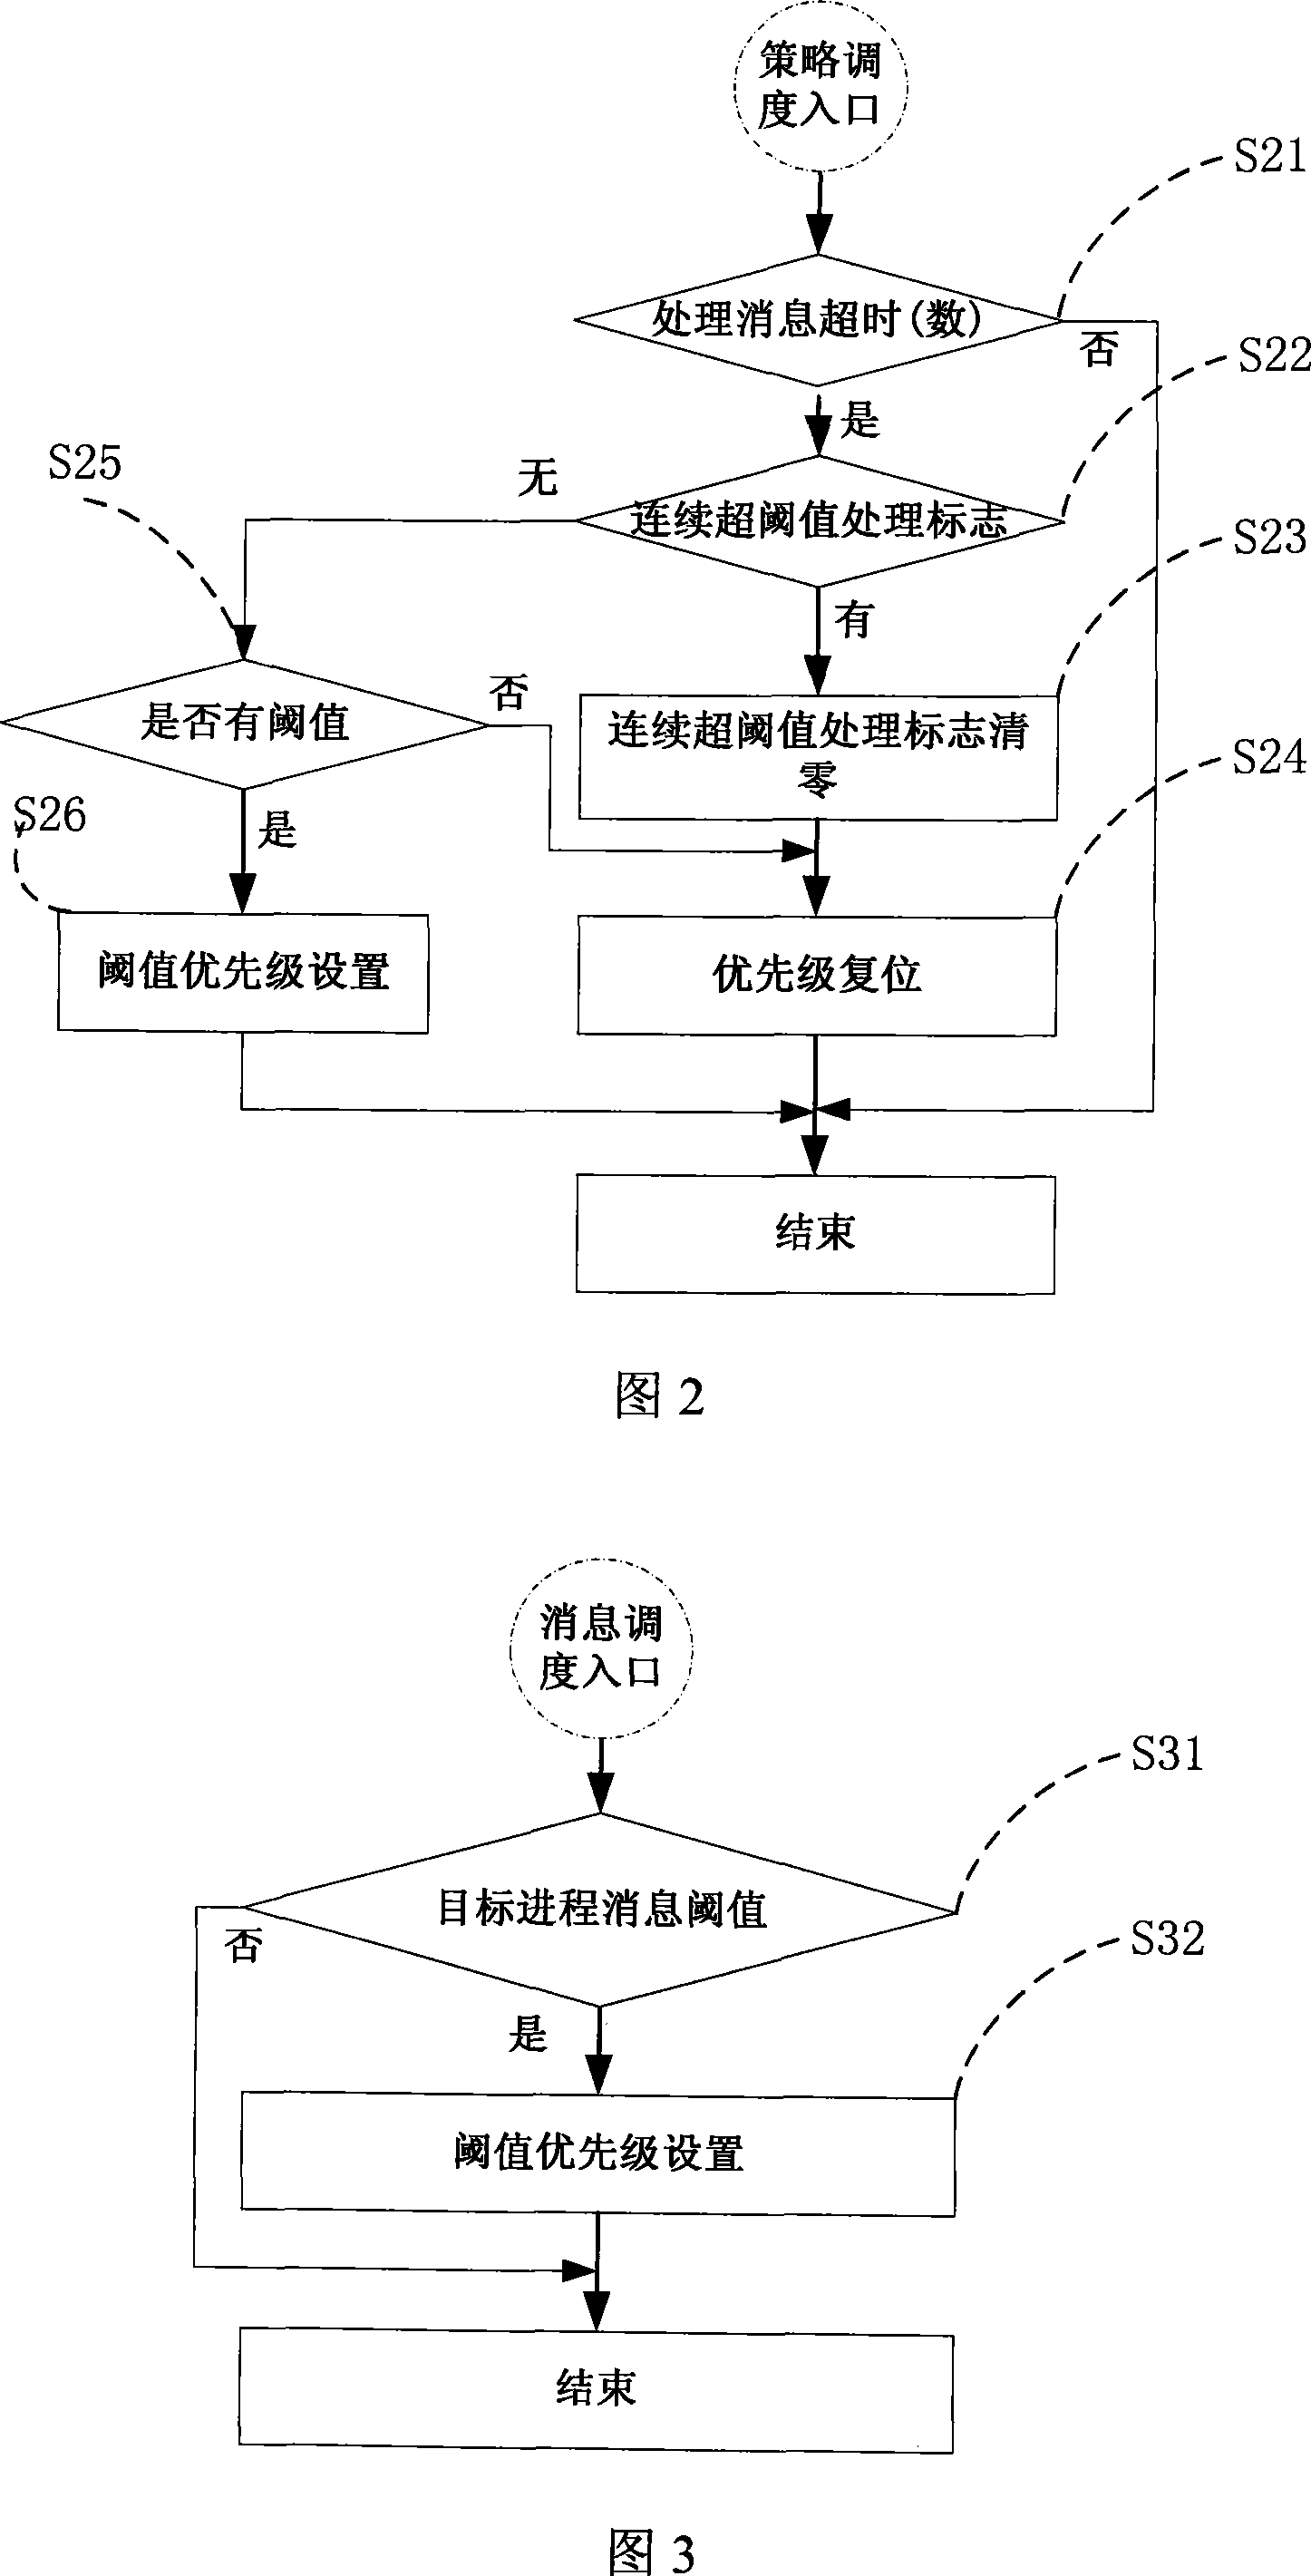 Built-in real-time system course equalization scheduling method